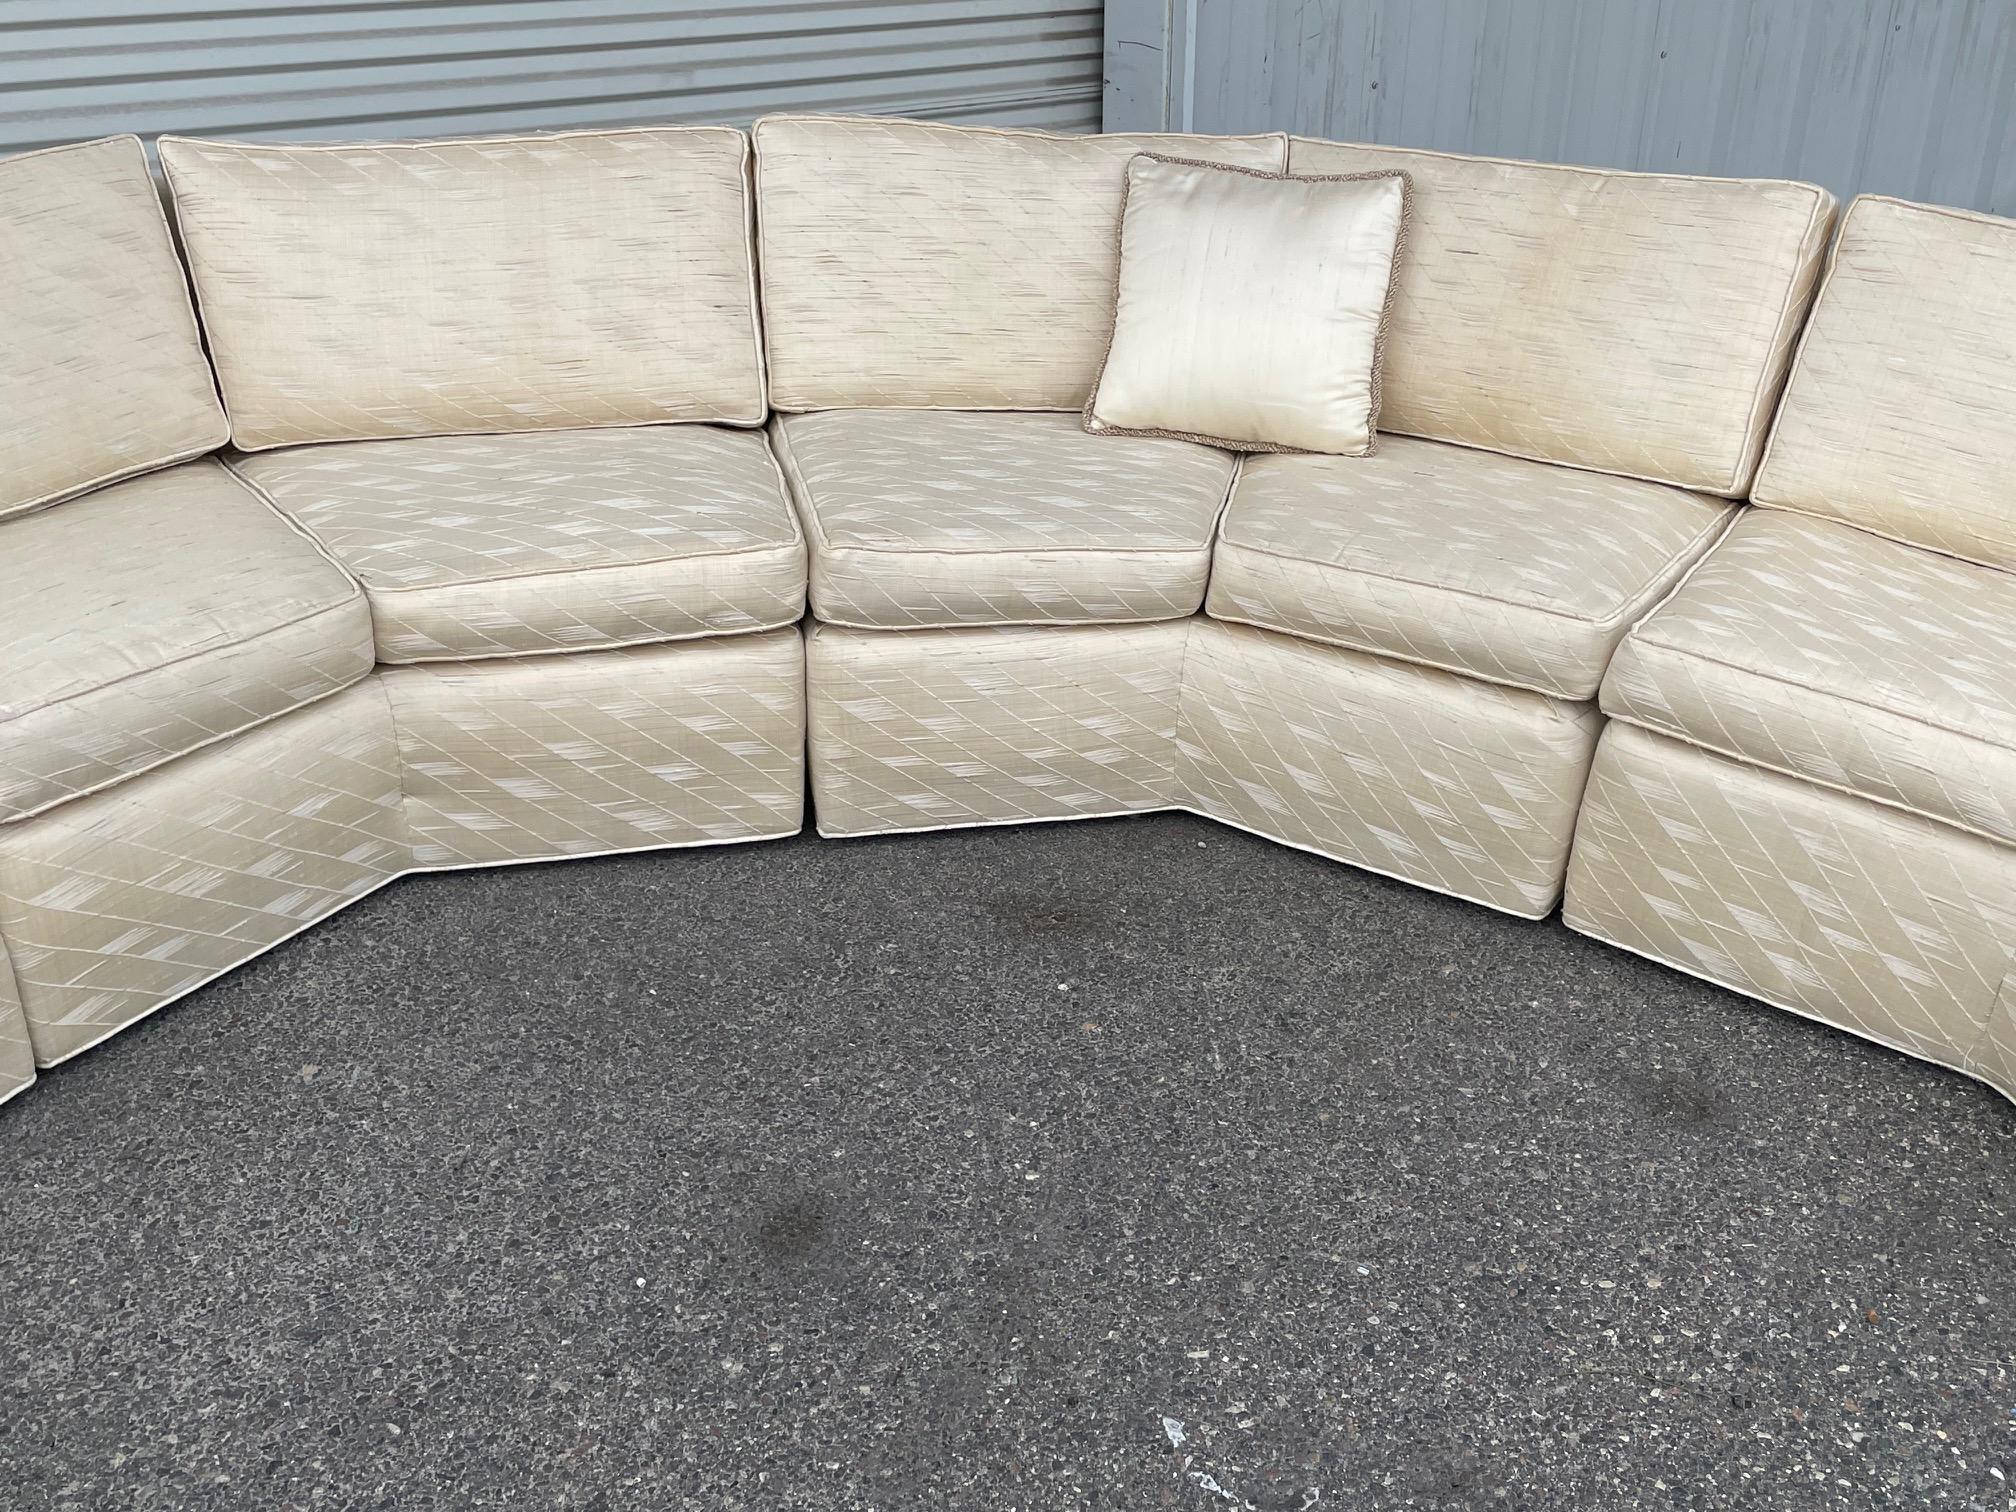 Large Hollywood Regency sofa in the style of Milo Baughman features five pieces in a geometrical curved form. Maker's label is no longer present. For transport purposes, each section measures approx. 56